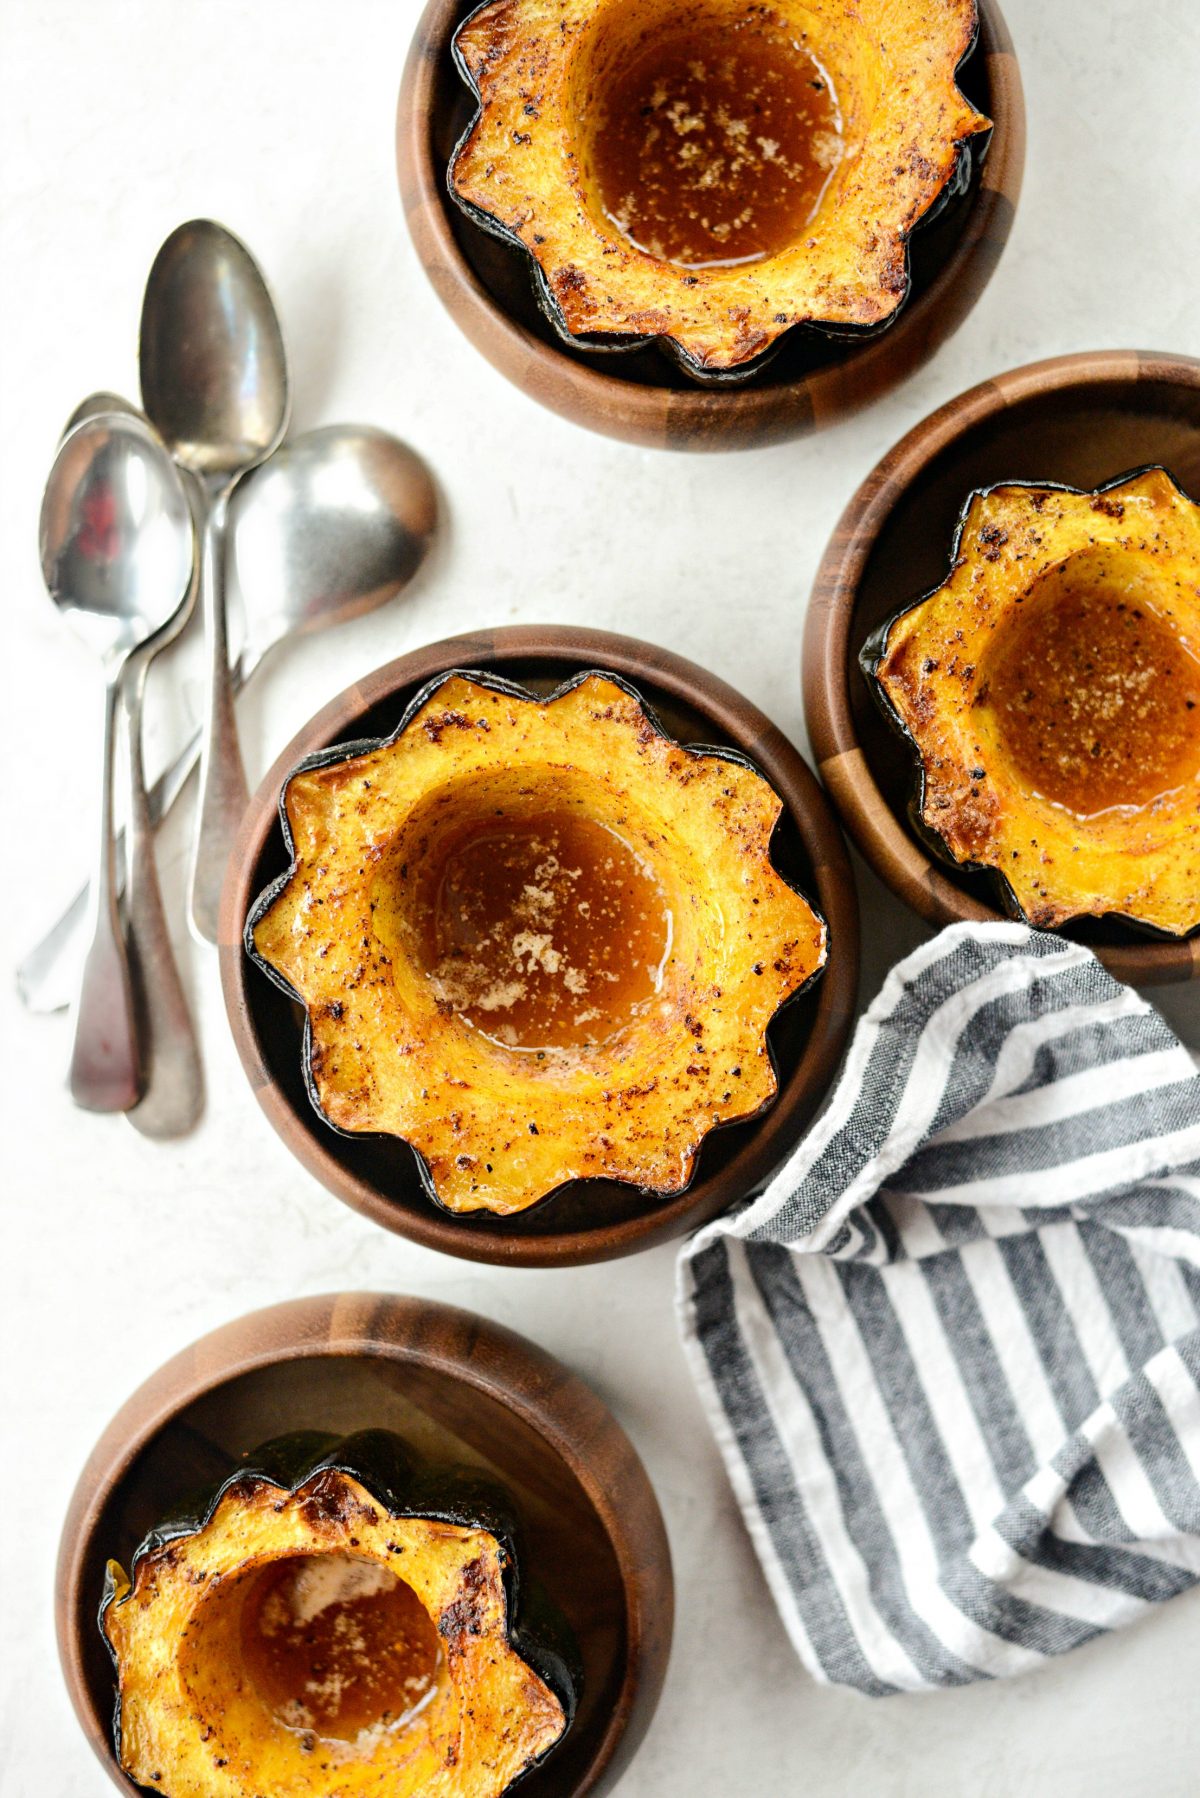 Maple Butter Roasted Acorn Squash